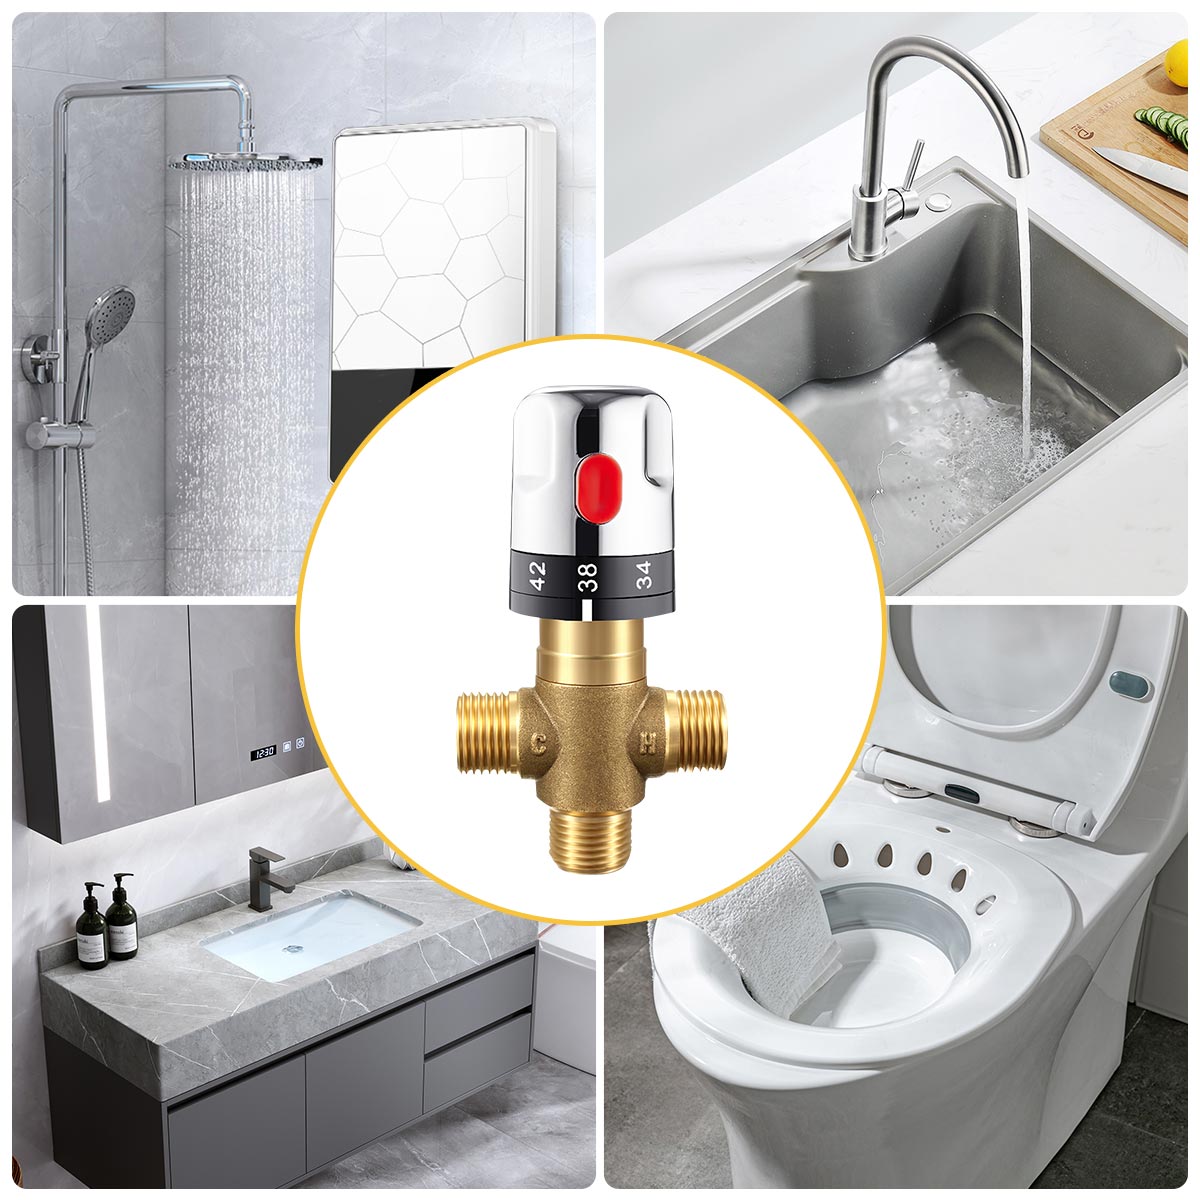 NEW Bathroom Shower Faucet Brass Thermostatic Mixer Valve Static Pipe Thermostat Faucets Water Temperature Control Bidet Shower